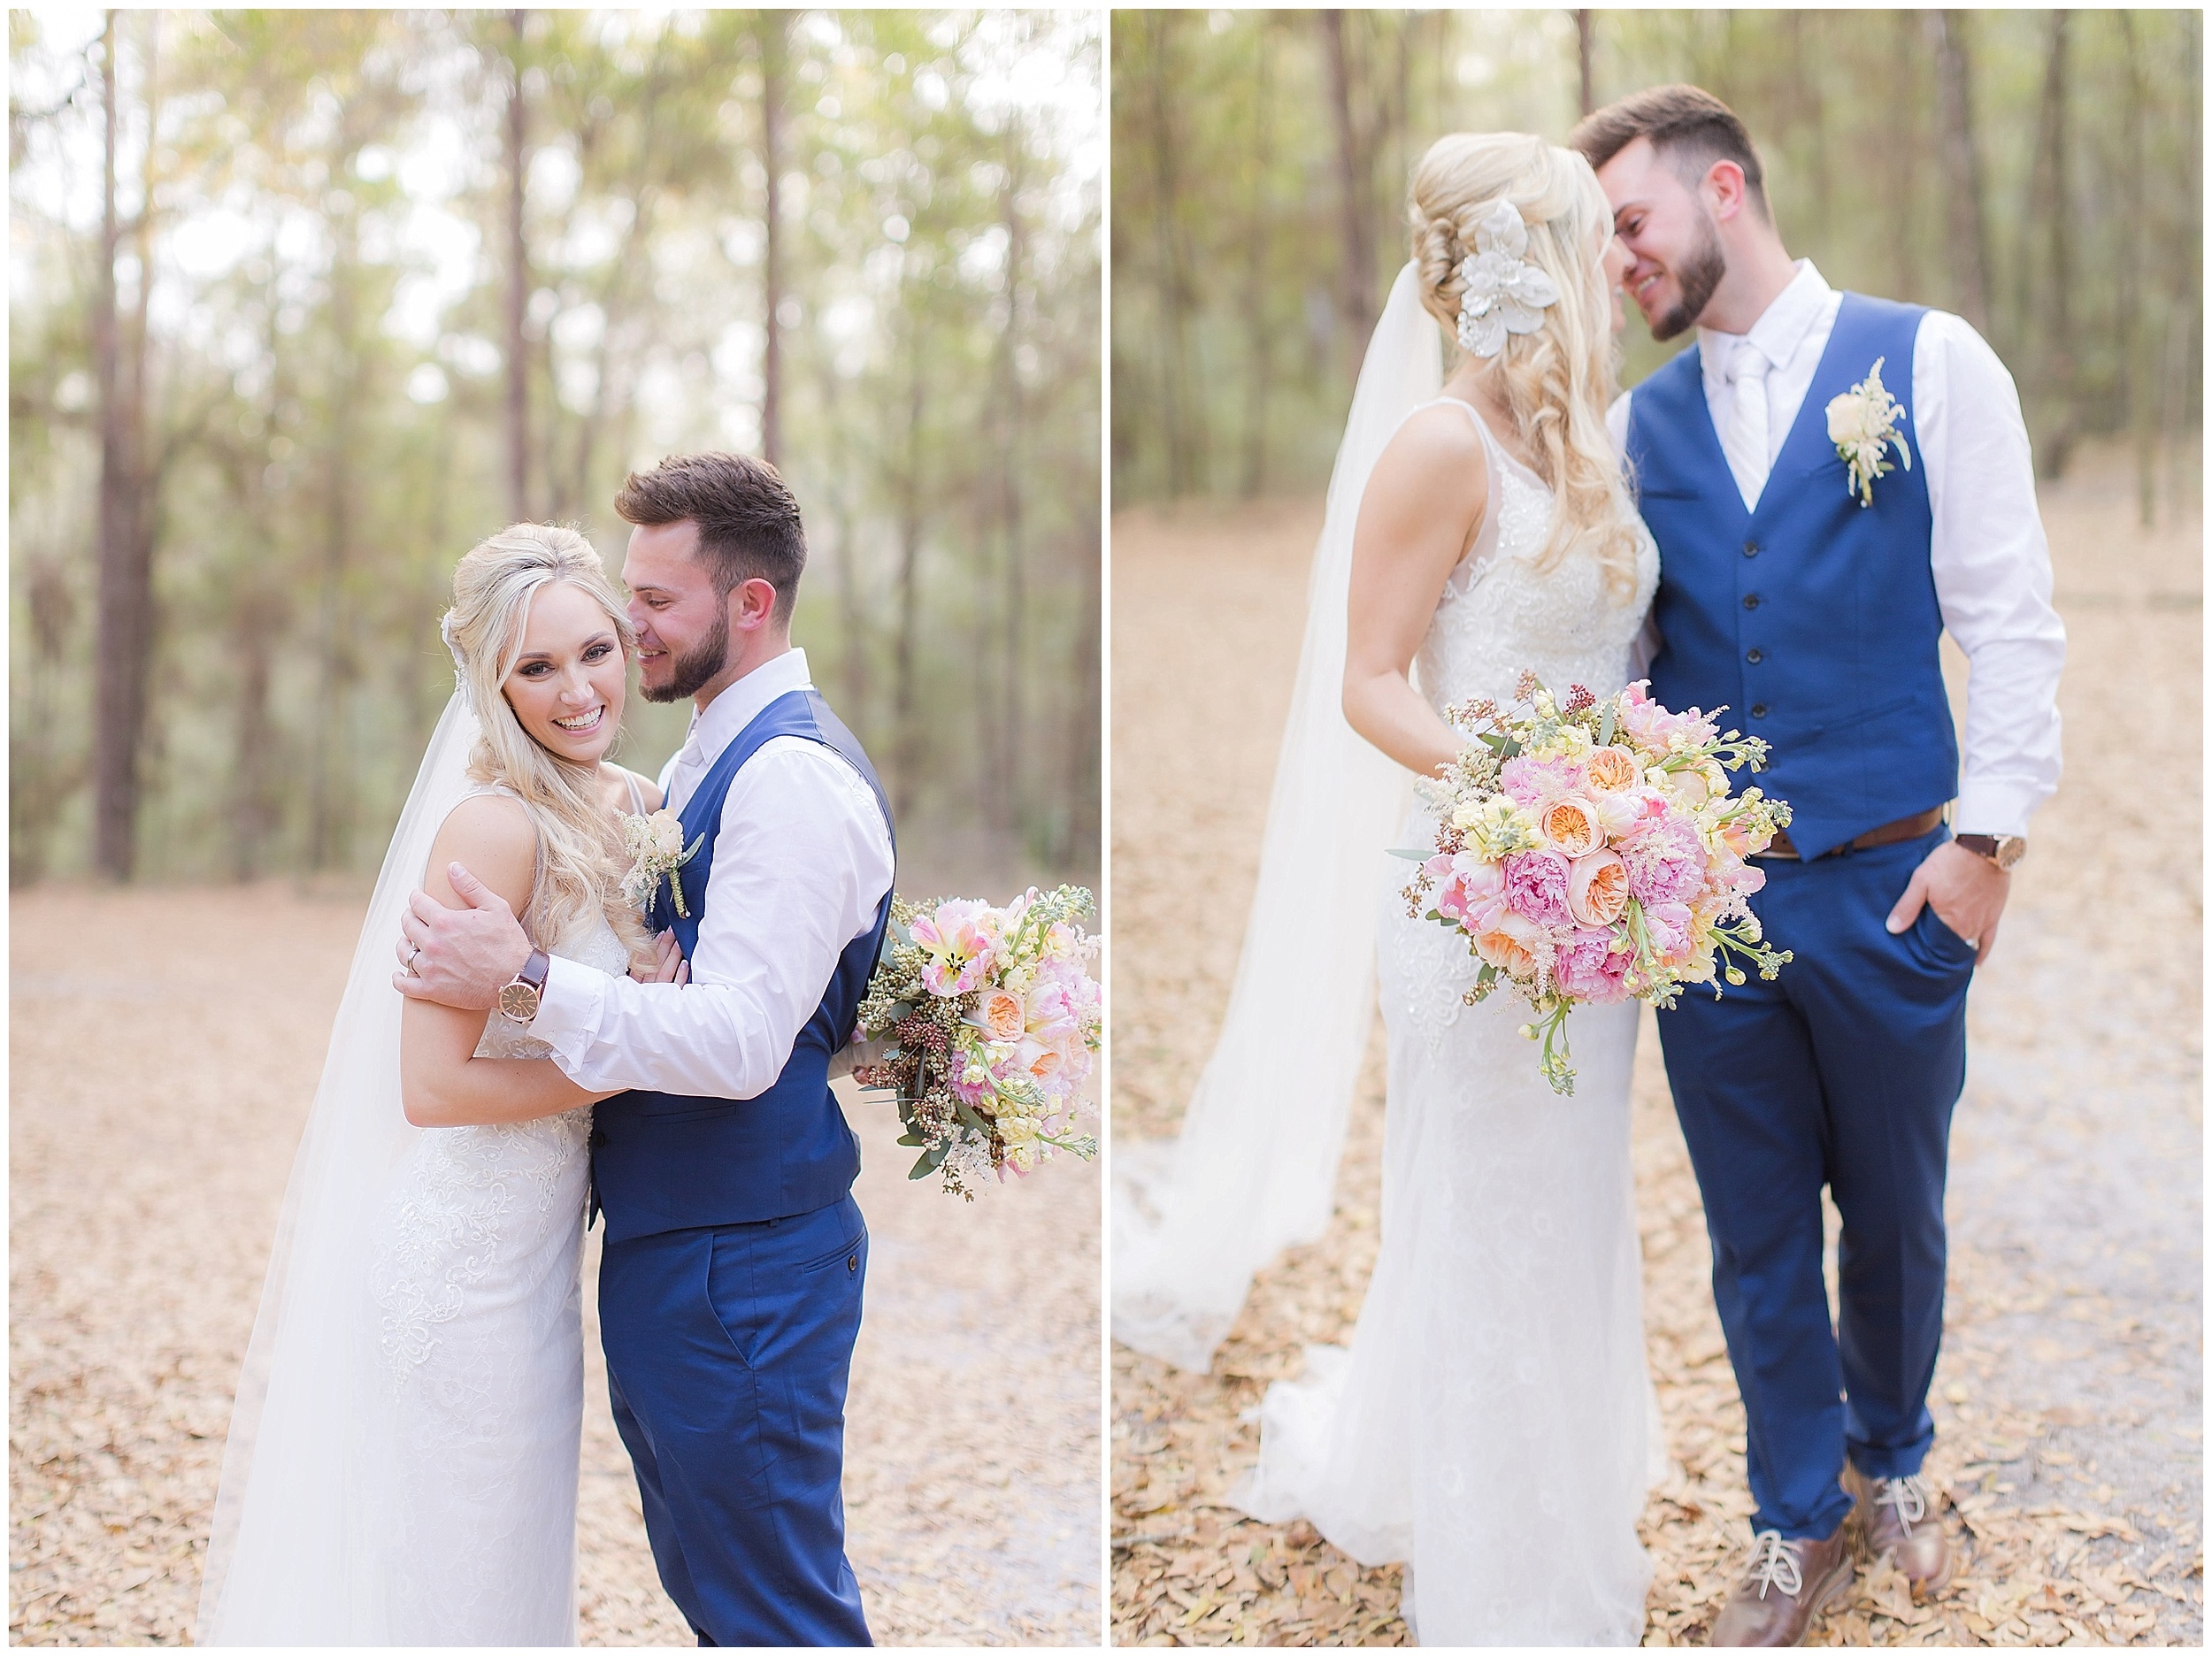 Bride and Groom after Rustic Wedding - Blue Suit Vest and Pink Flowers 